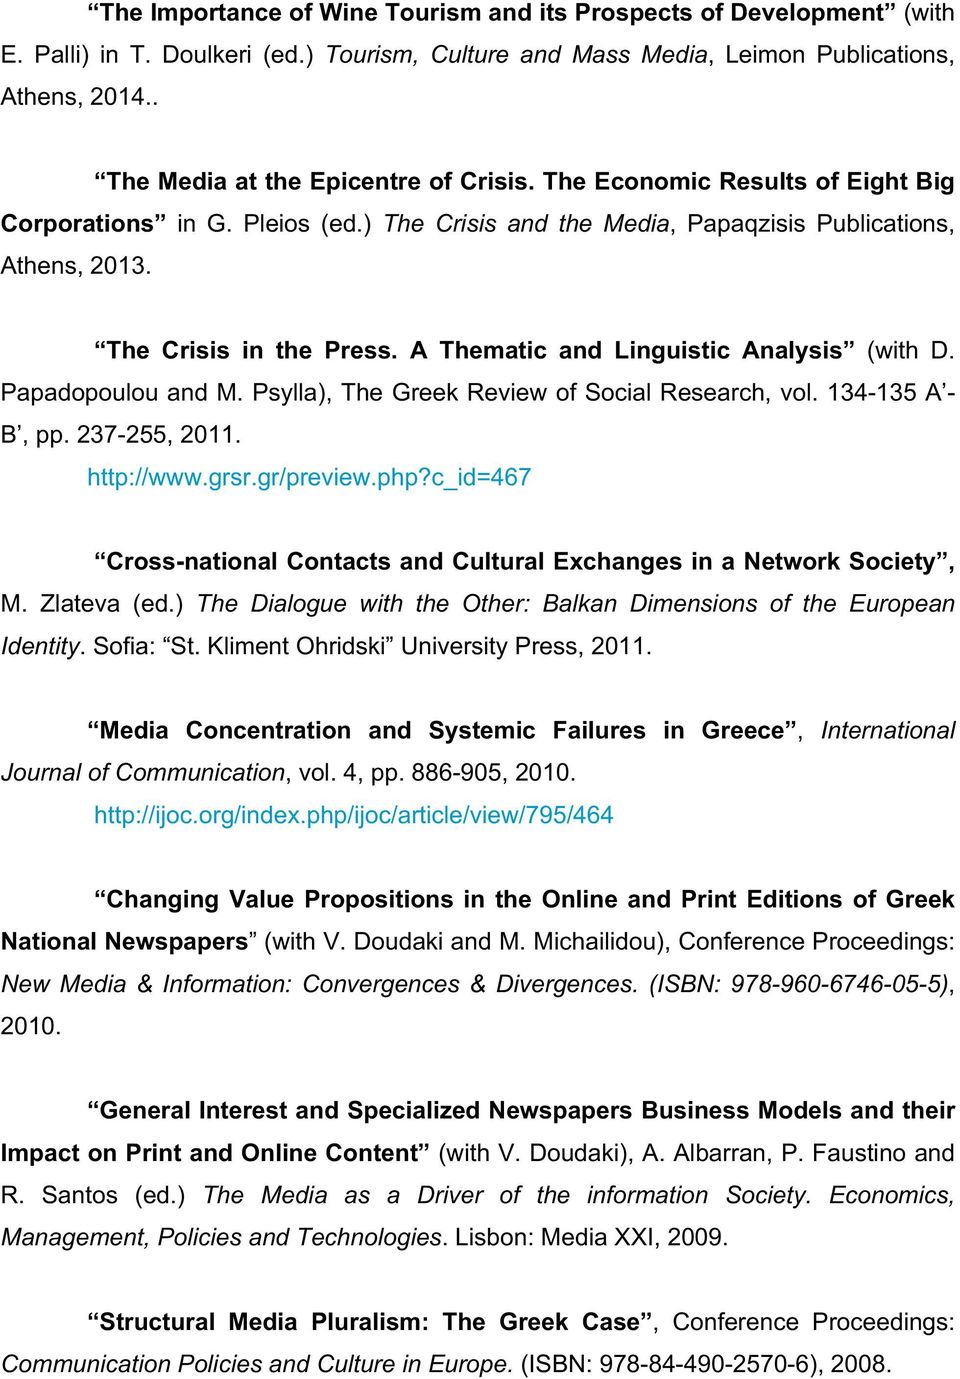 A Thematic and Linguistic Analysis (with D. Papadopoulou and M. Psylla), The Greek Review of Social Research, vol. 134-135 Α - Β, pp. 237-255, 2011. http://www.grsr.gr/preview.php?